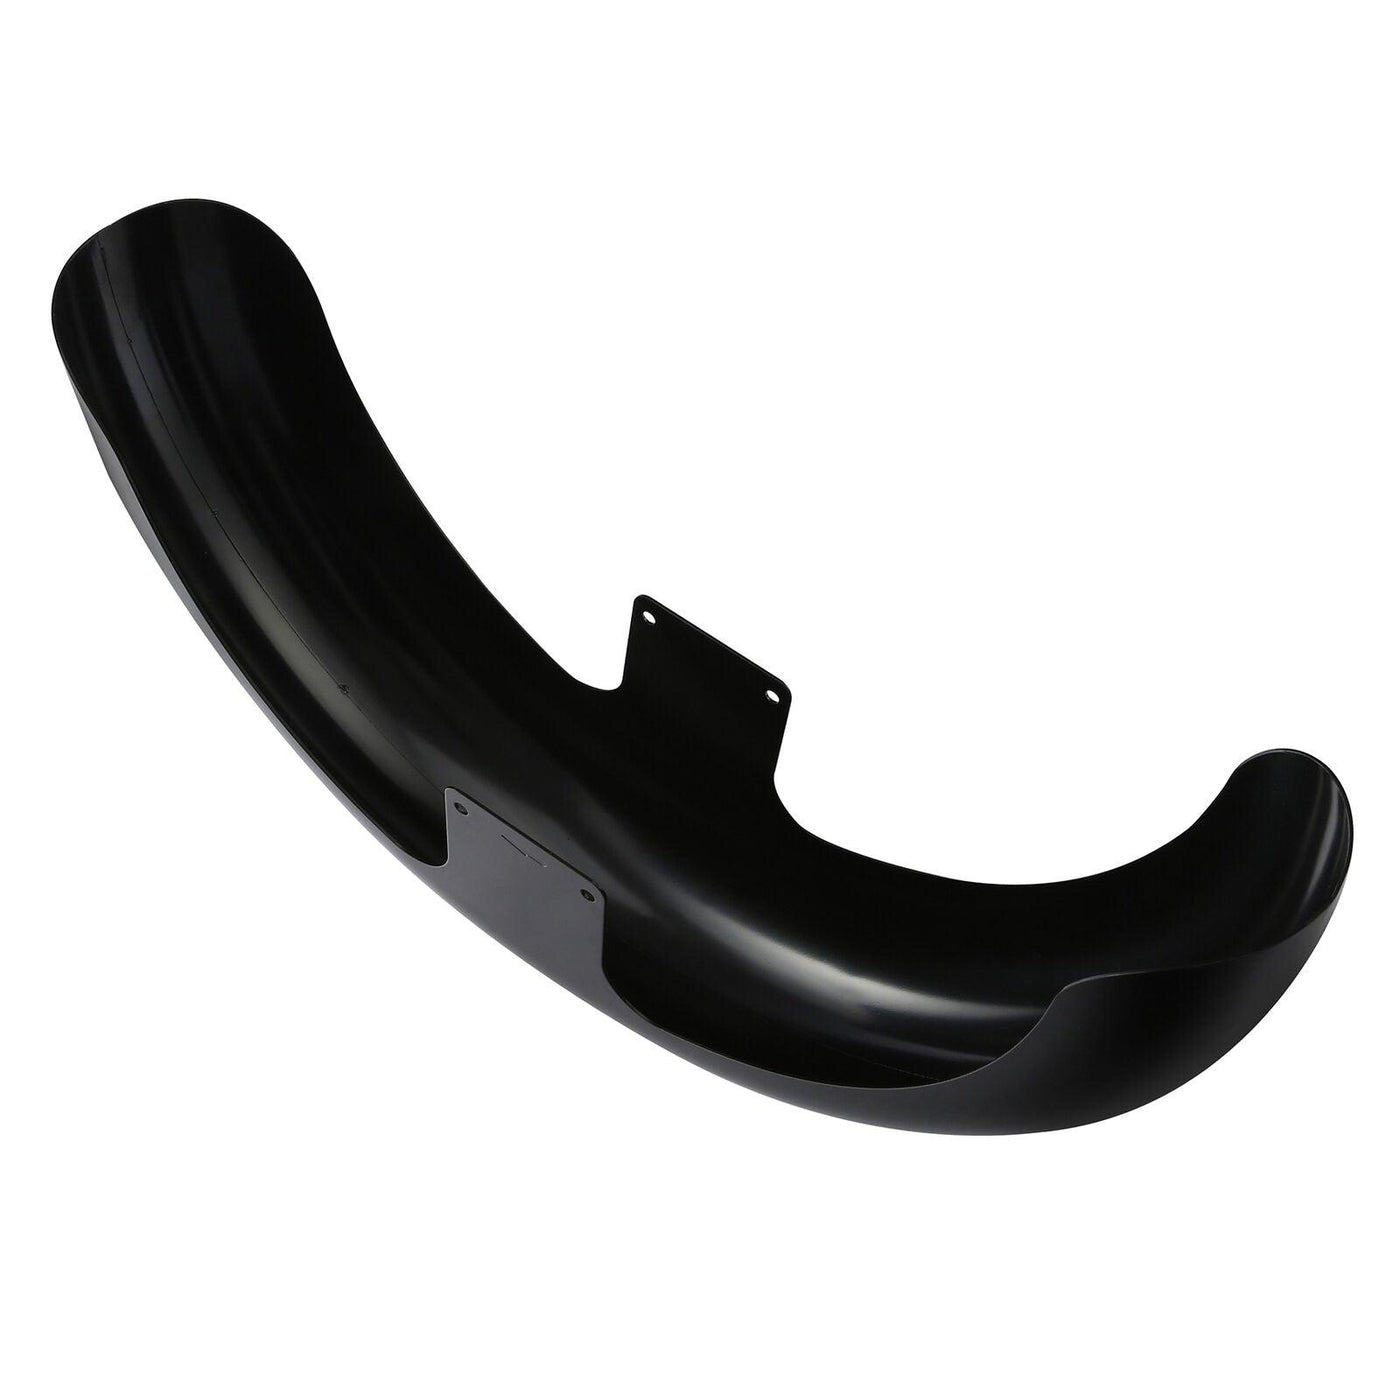 21" Wrap Front Fender Risers Spacer Mount Fit For Harley Street Road Glide 14-Up - Moto Life Products